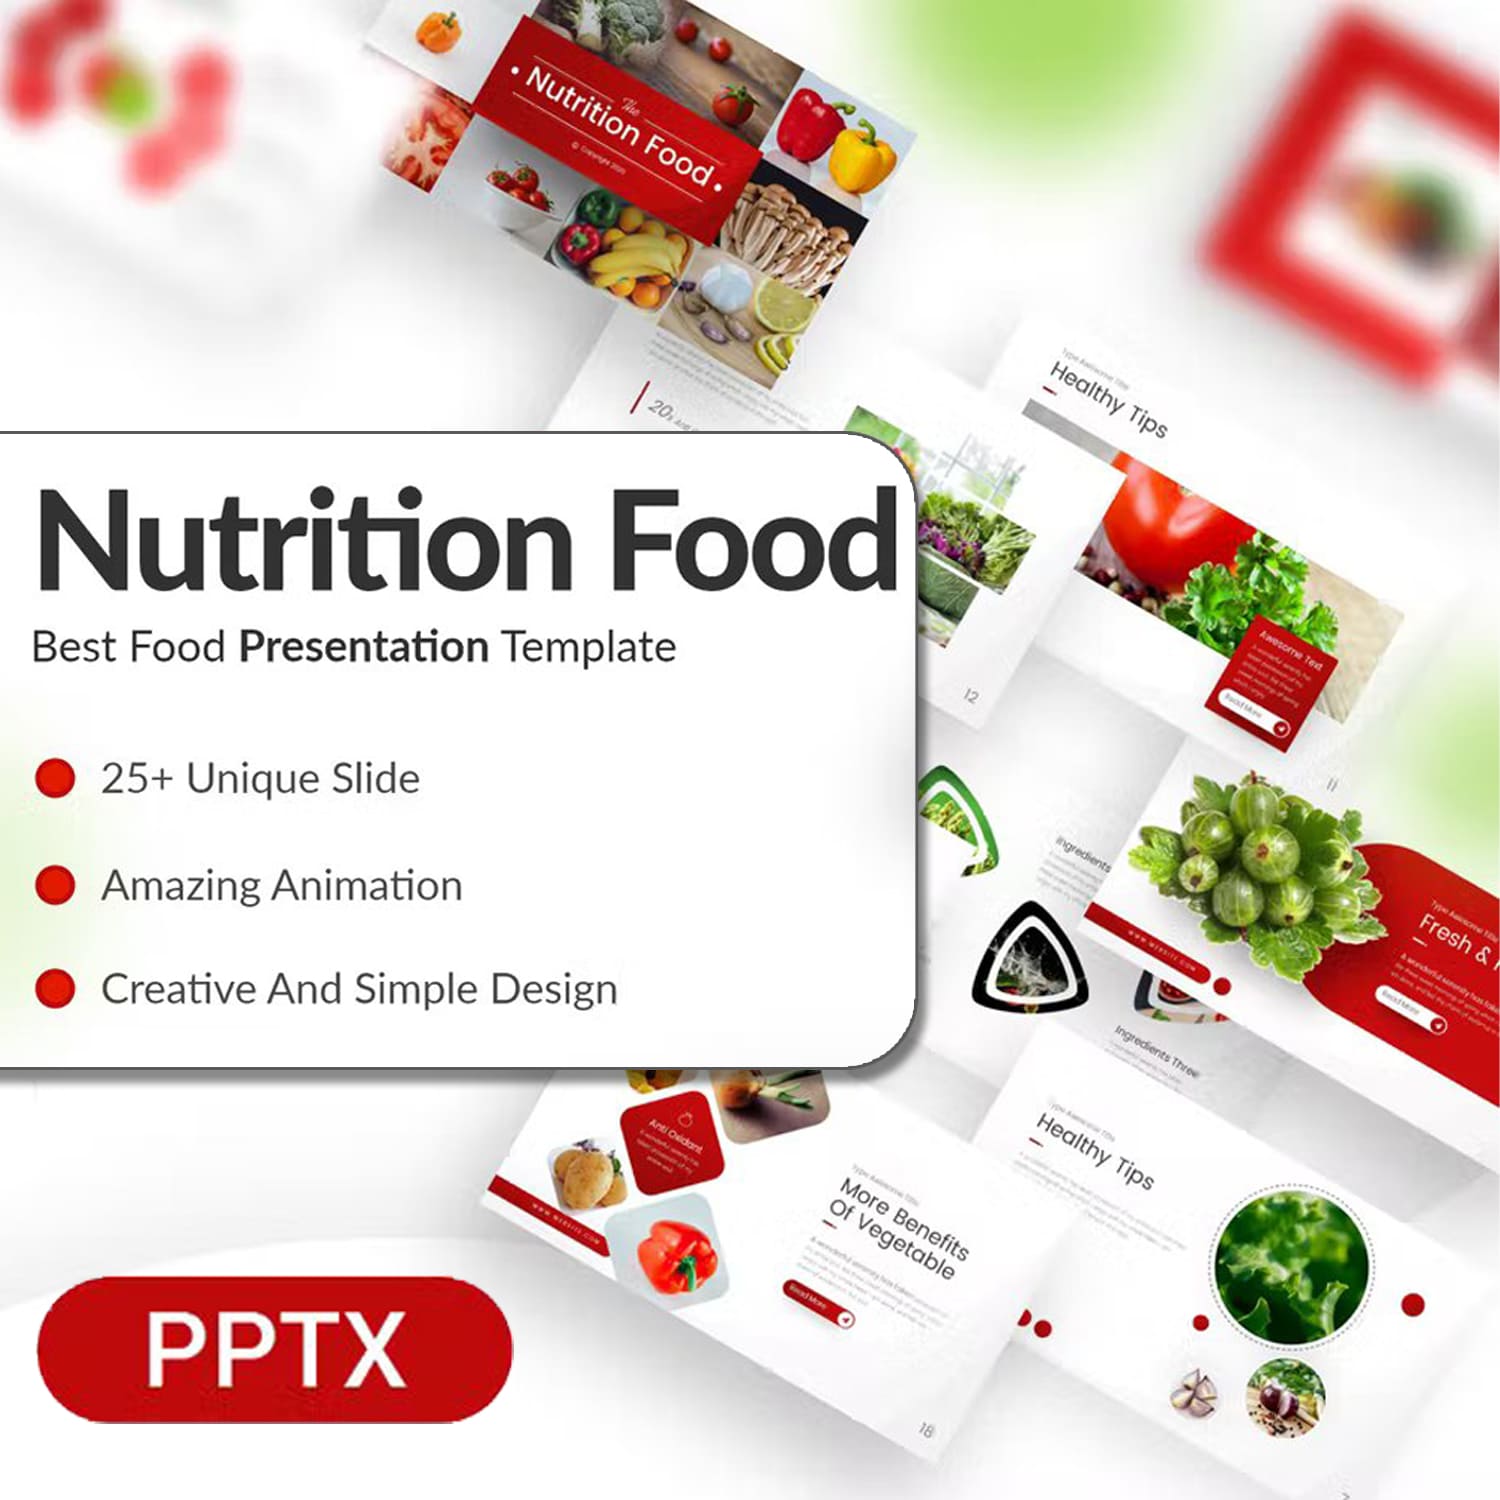 Nutrition food presentation powerpoint template from BrandEarth.